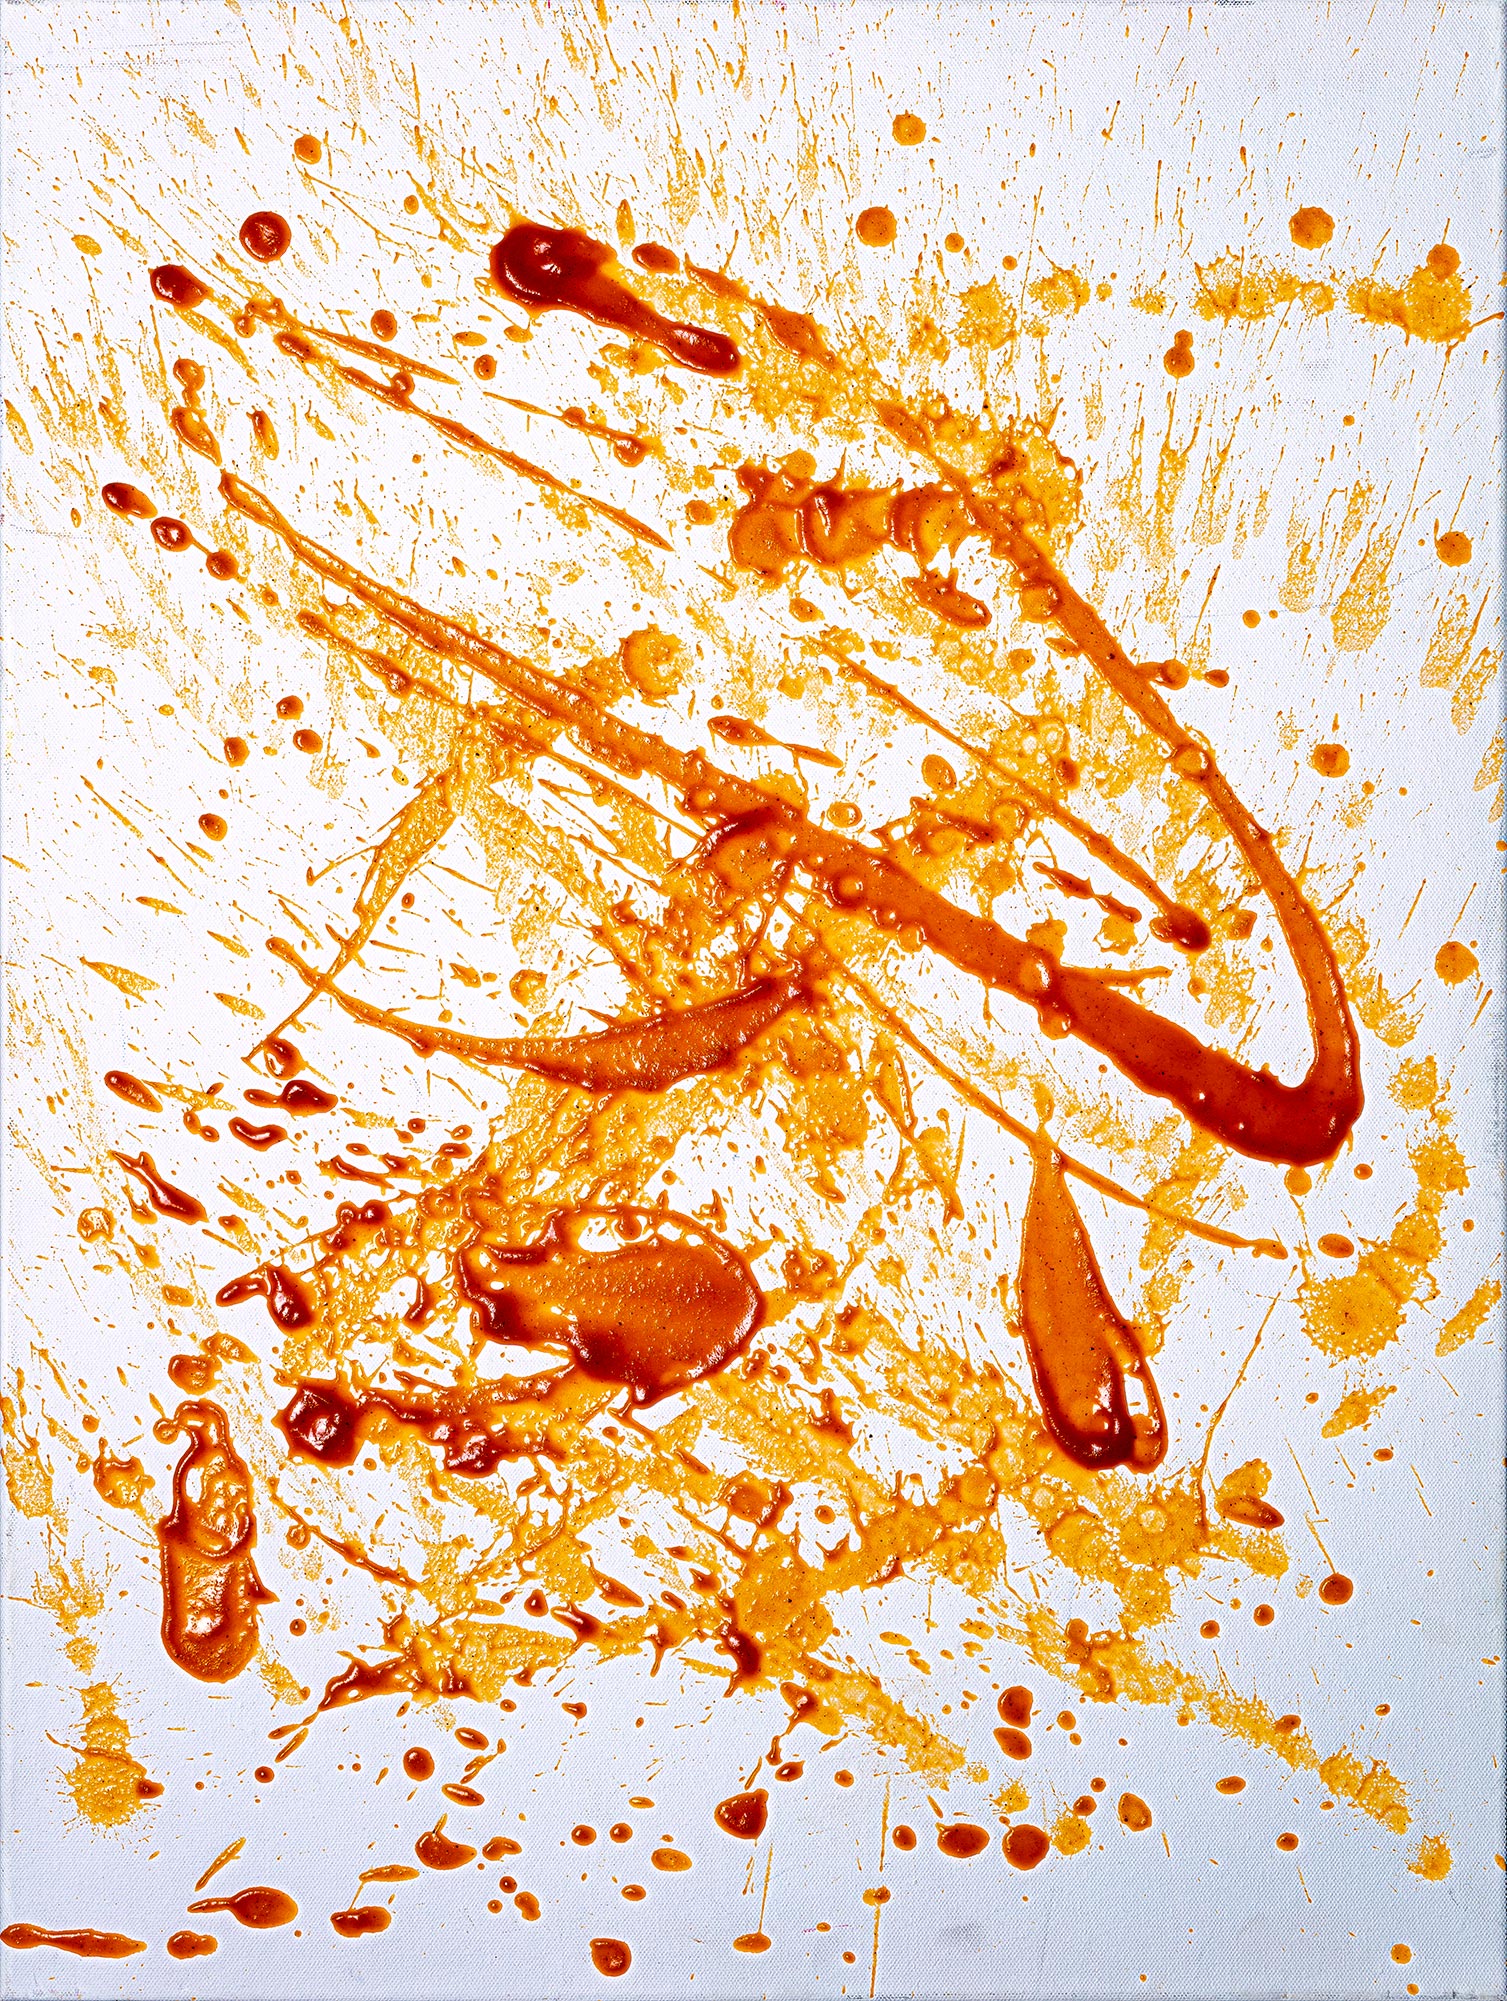 Finished pumpkin ketchup, the photo is inspired by the technique of Jackson Pollock.